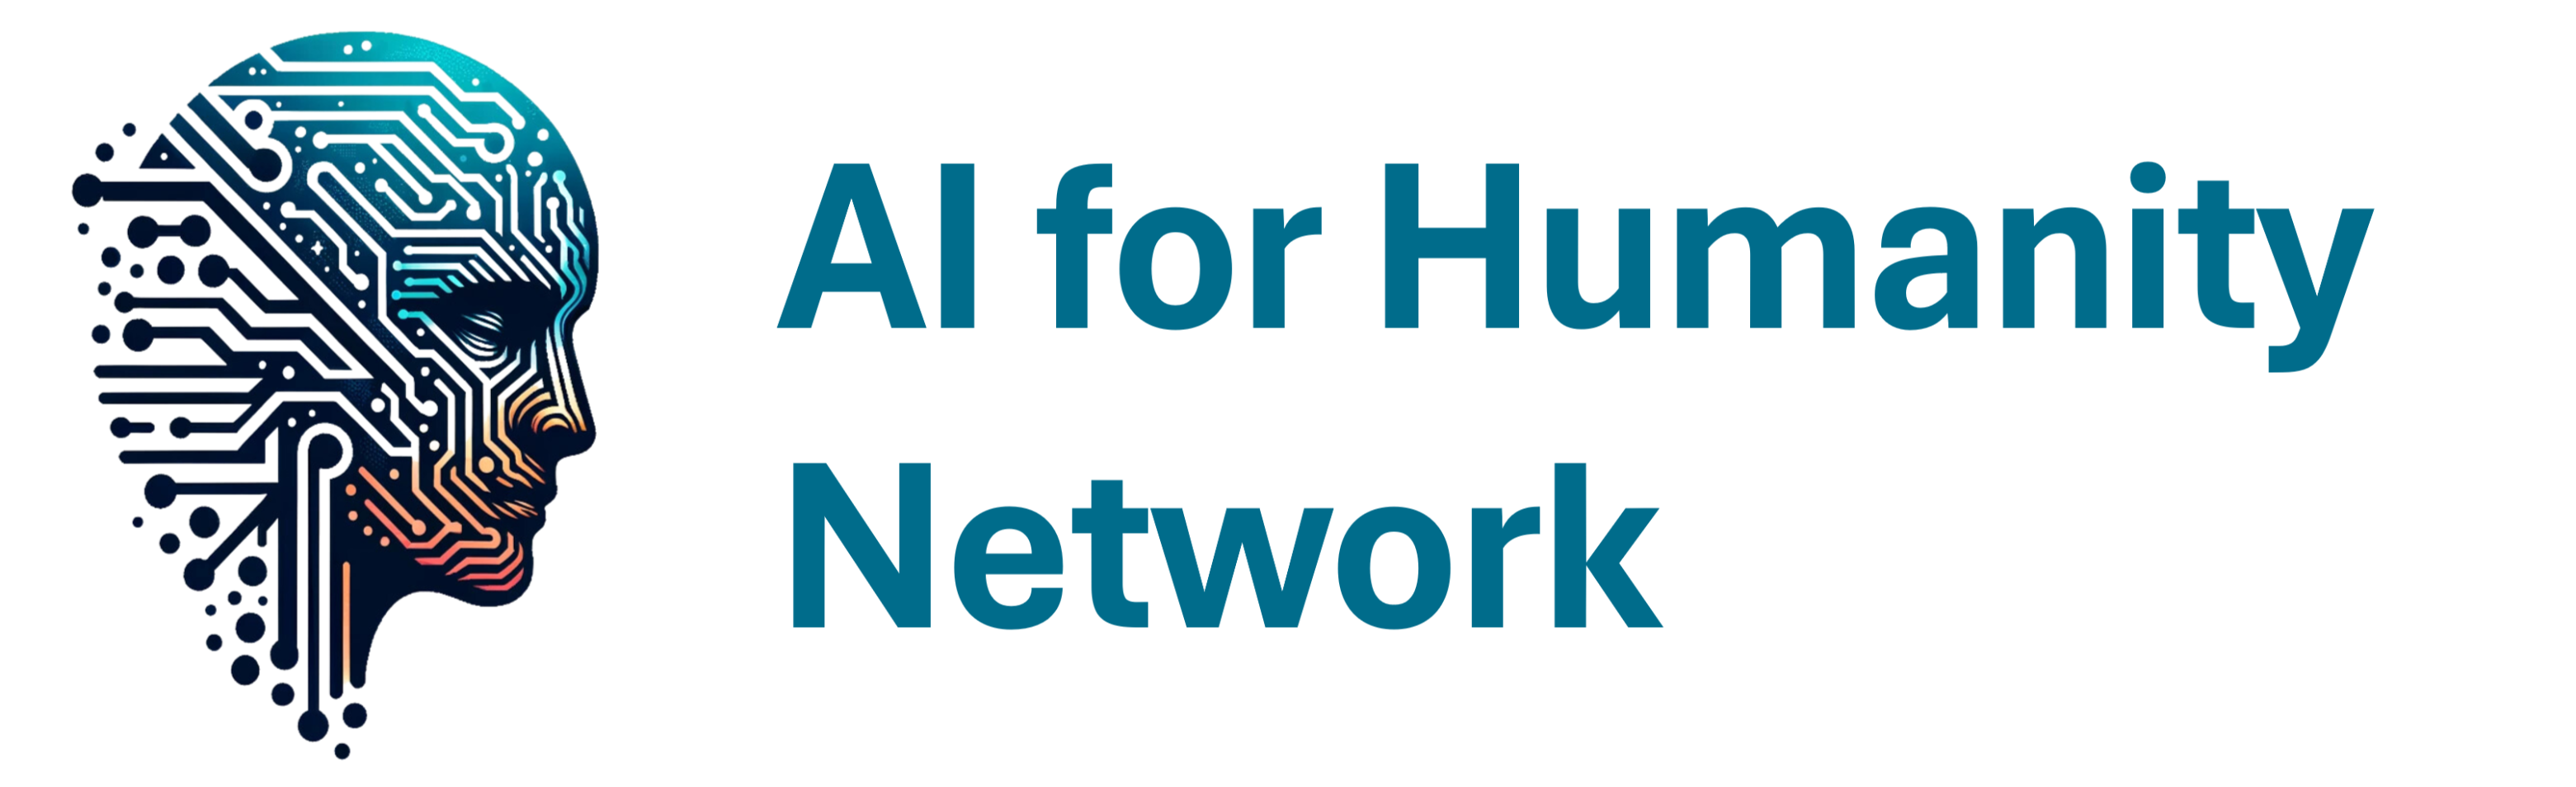 AI for Humanity Network